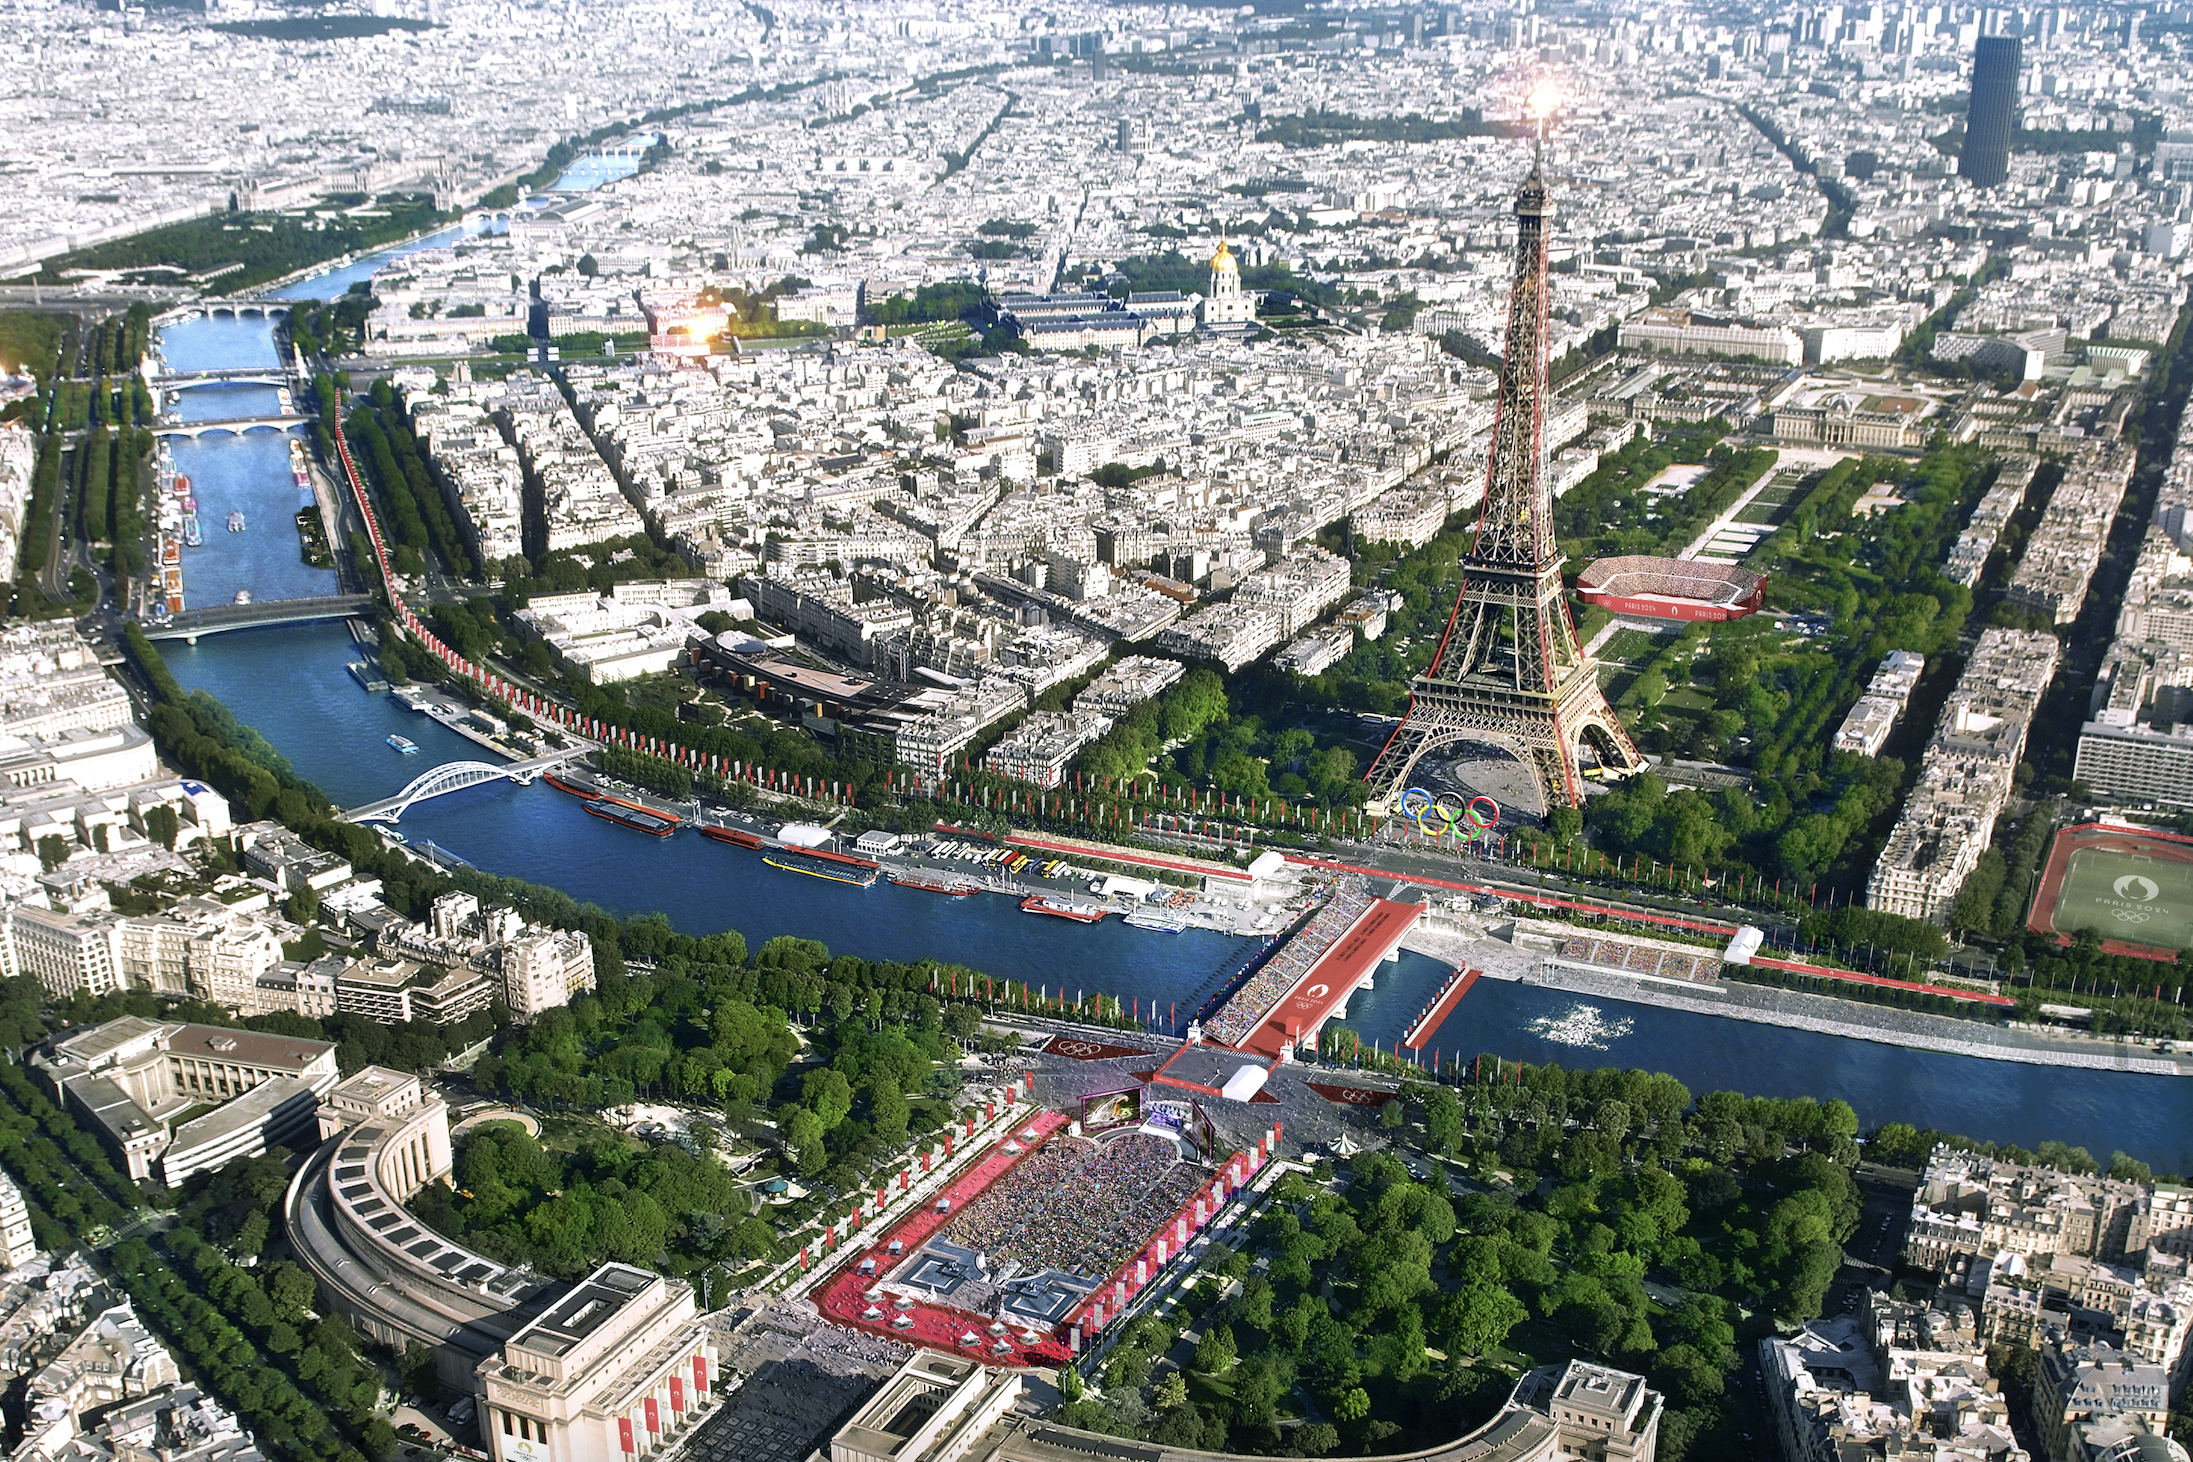 A rendering showing the Eiffel Tower with Olympic venues in the park below